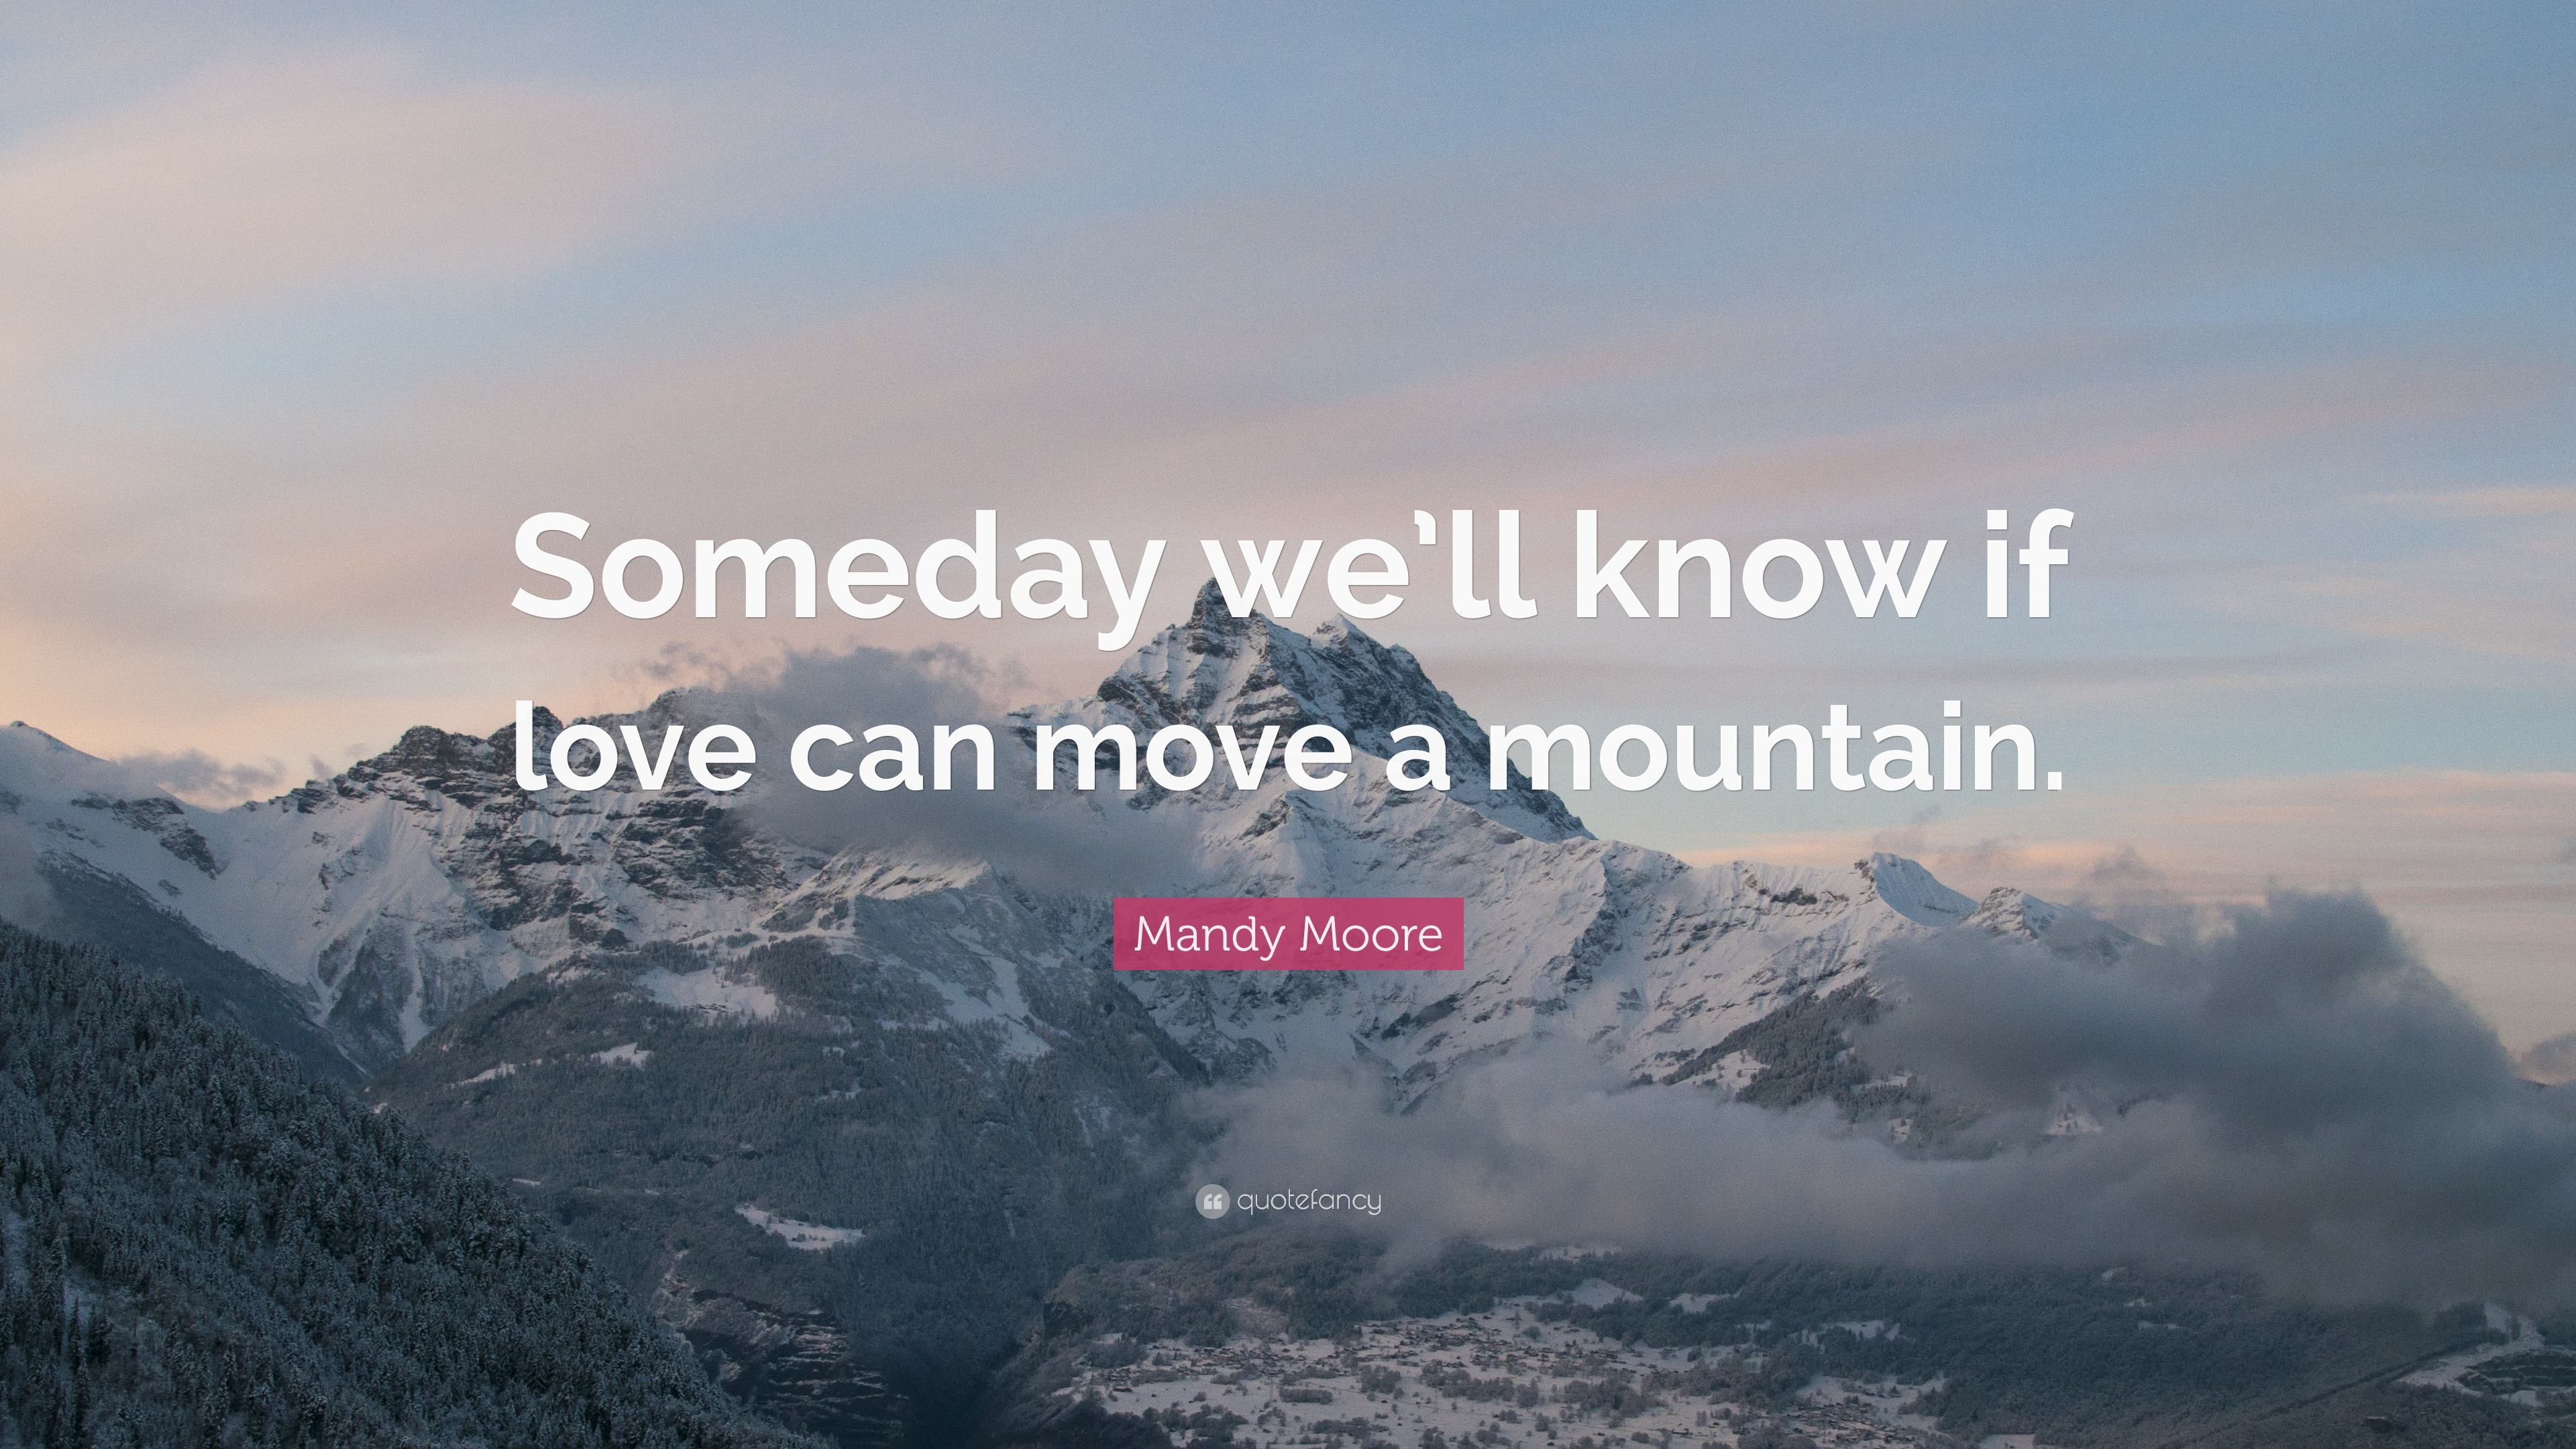 Mandy Moore Quote Someday We Ll Know If Love Can Move A Mountain